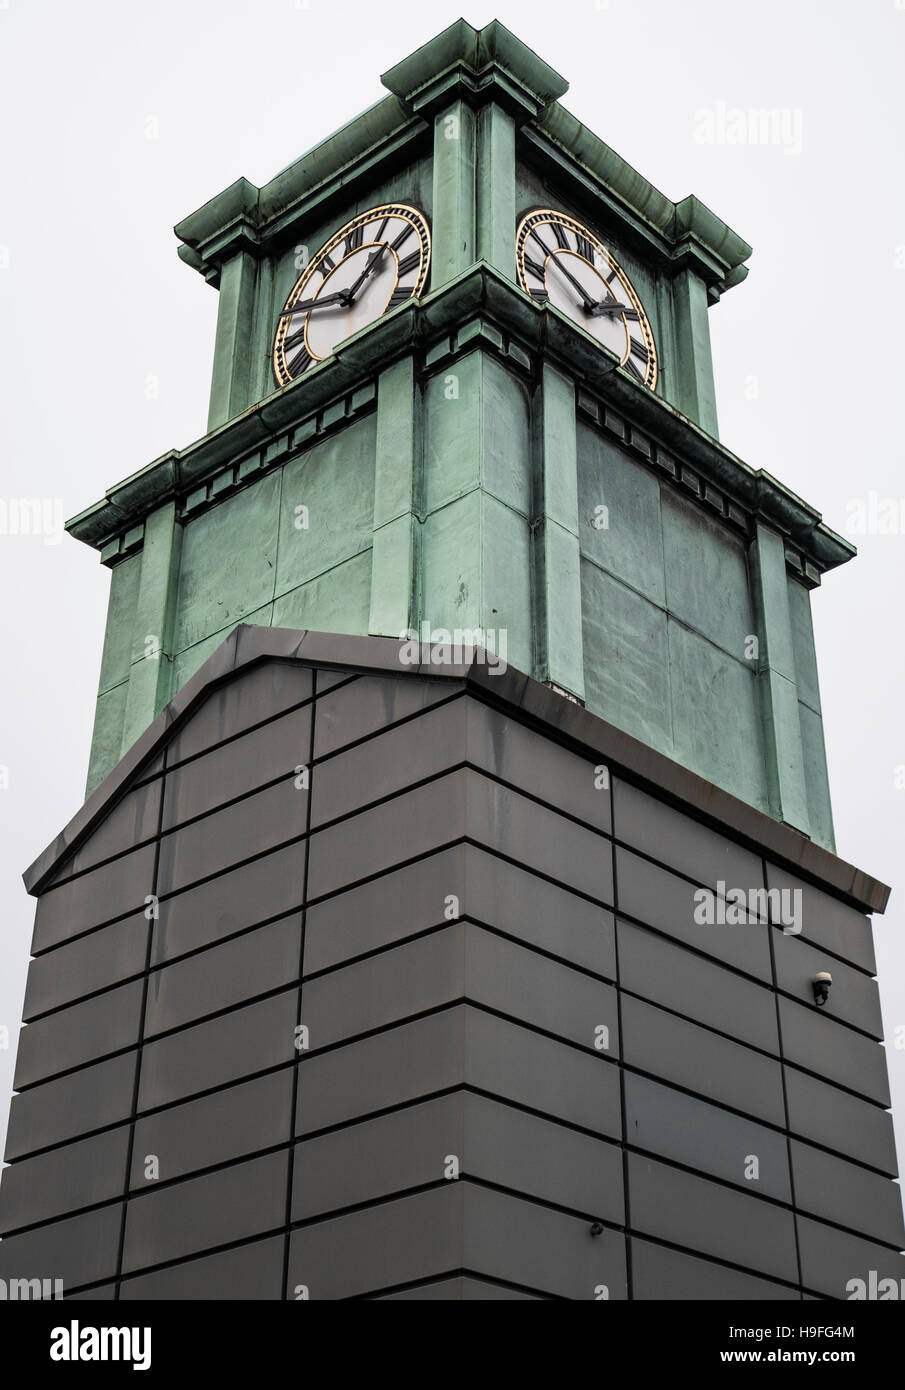 Restored clock tower from the old Crompton Parkinson building, Guiseley, Leeds, West Yorkshire Stock Photo